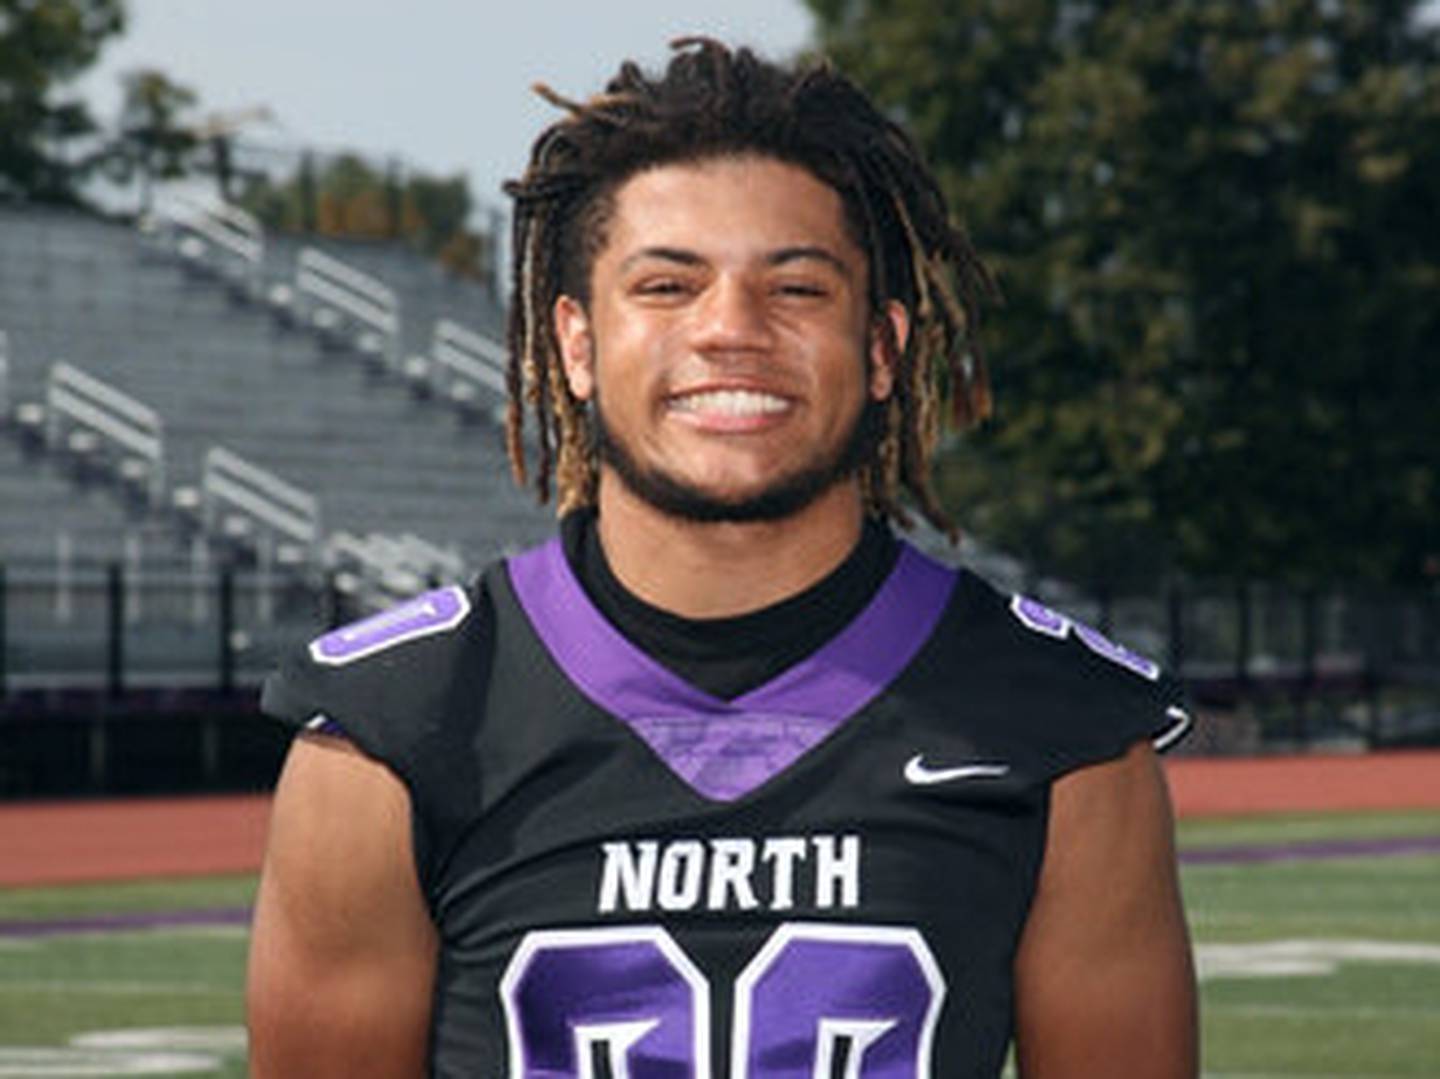 Downers Grove North running back Noah Battle. Photo courtesy of DGN Athletics.